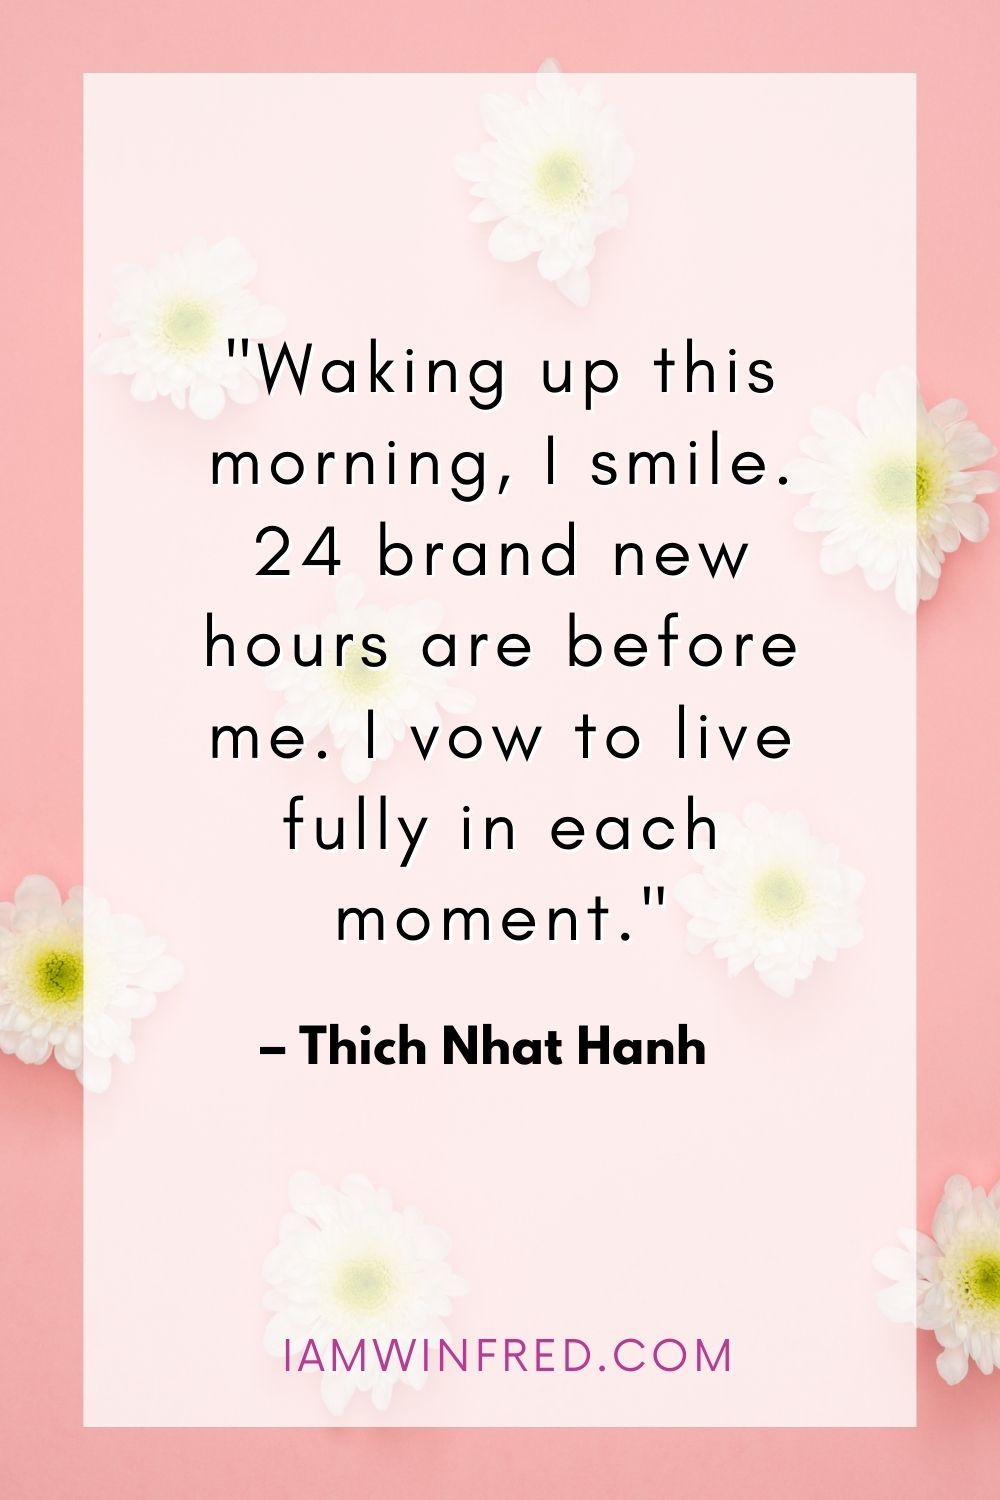 Waking Up This Morning I Smile. 24 Brand New Hours Are Before Me. I Vow To Live Fully In Each Moment.